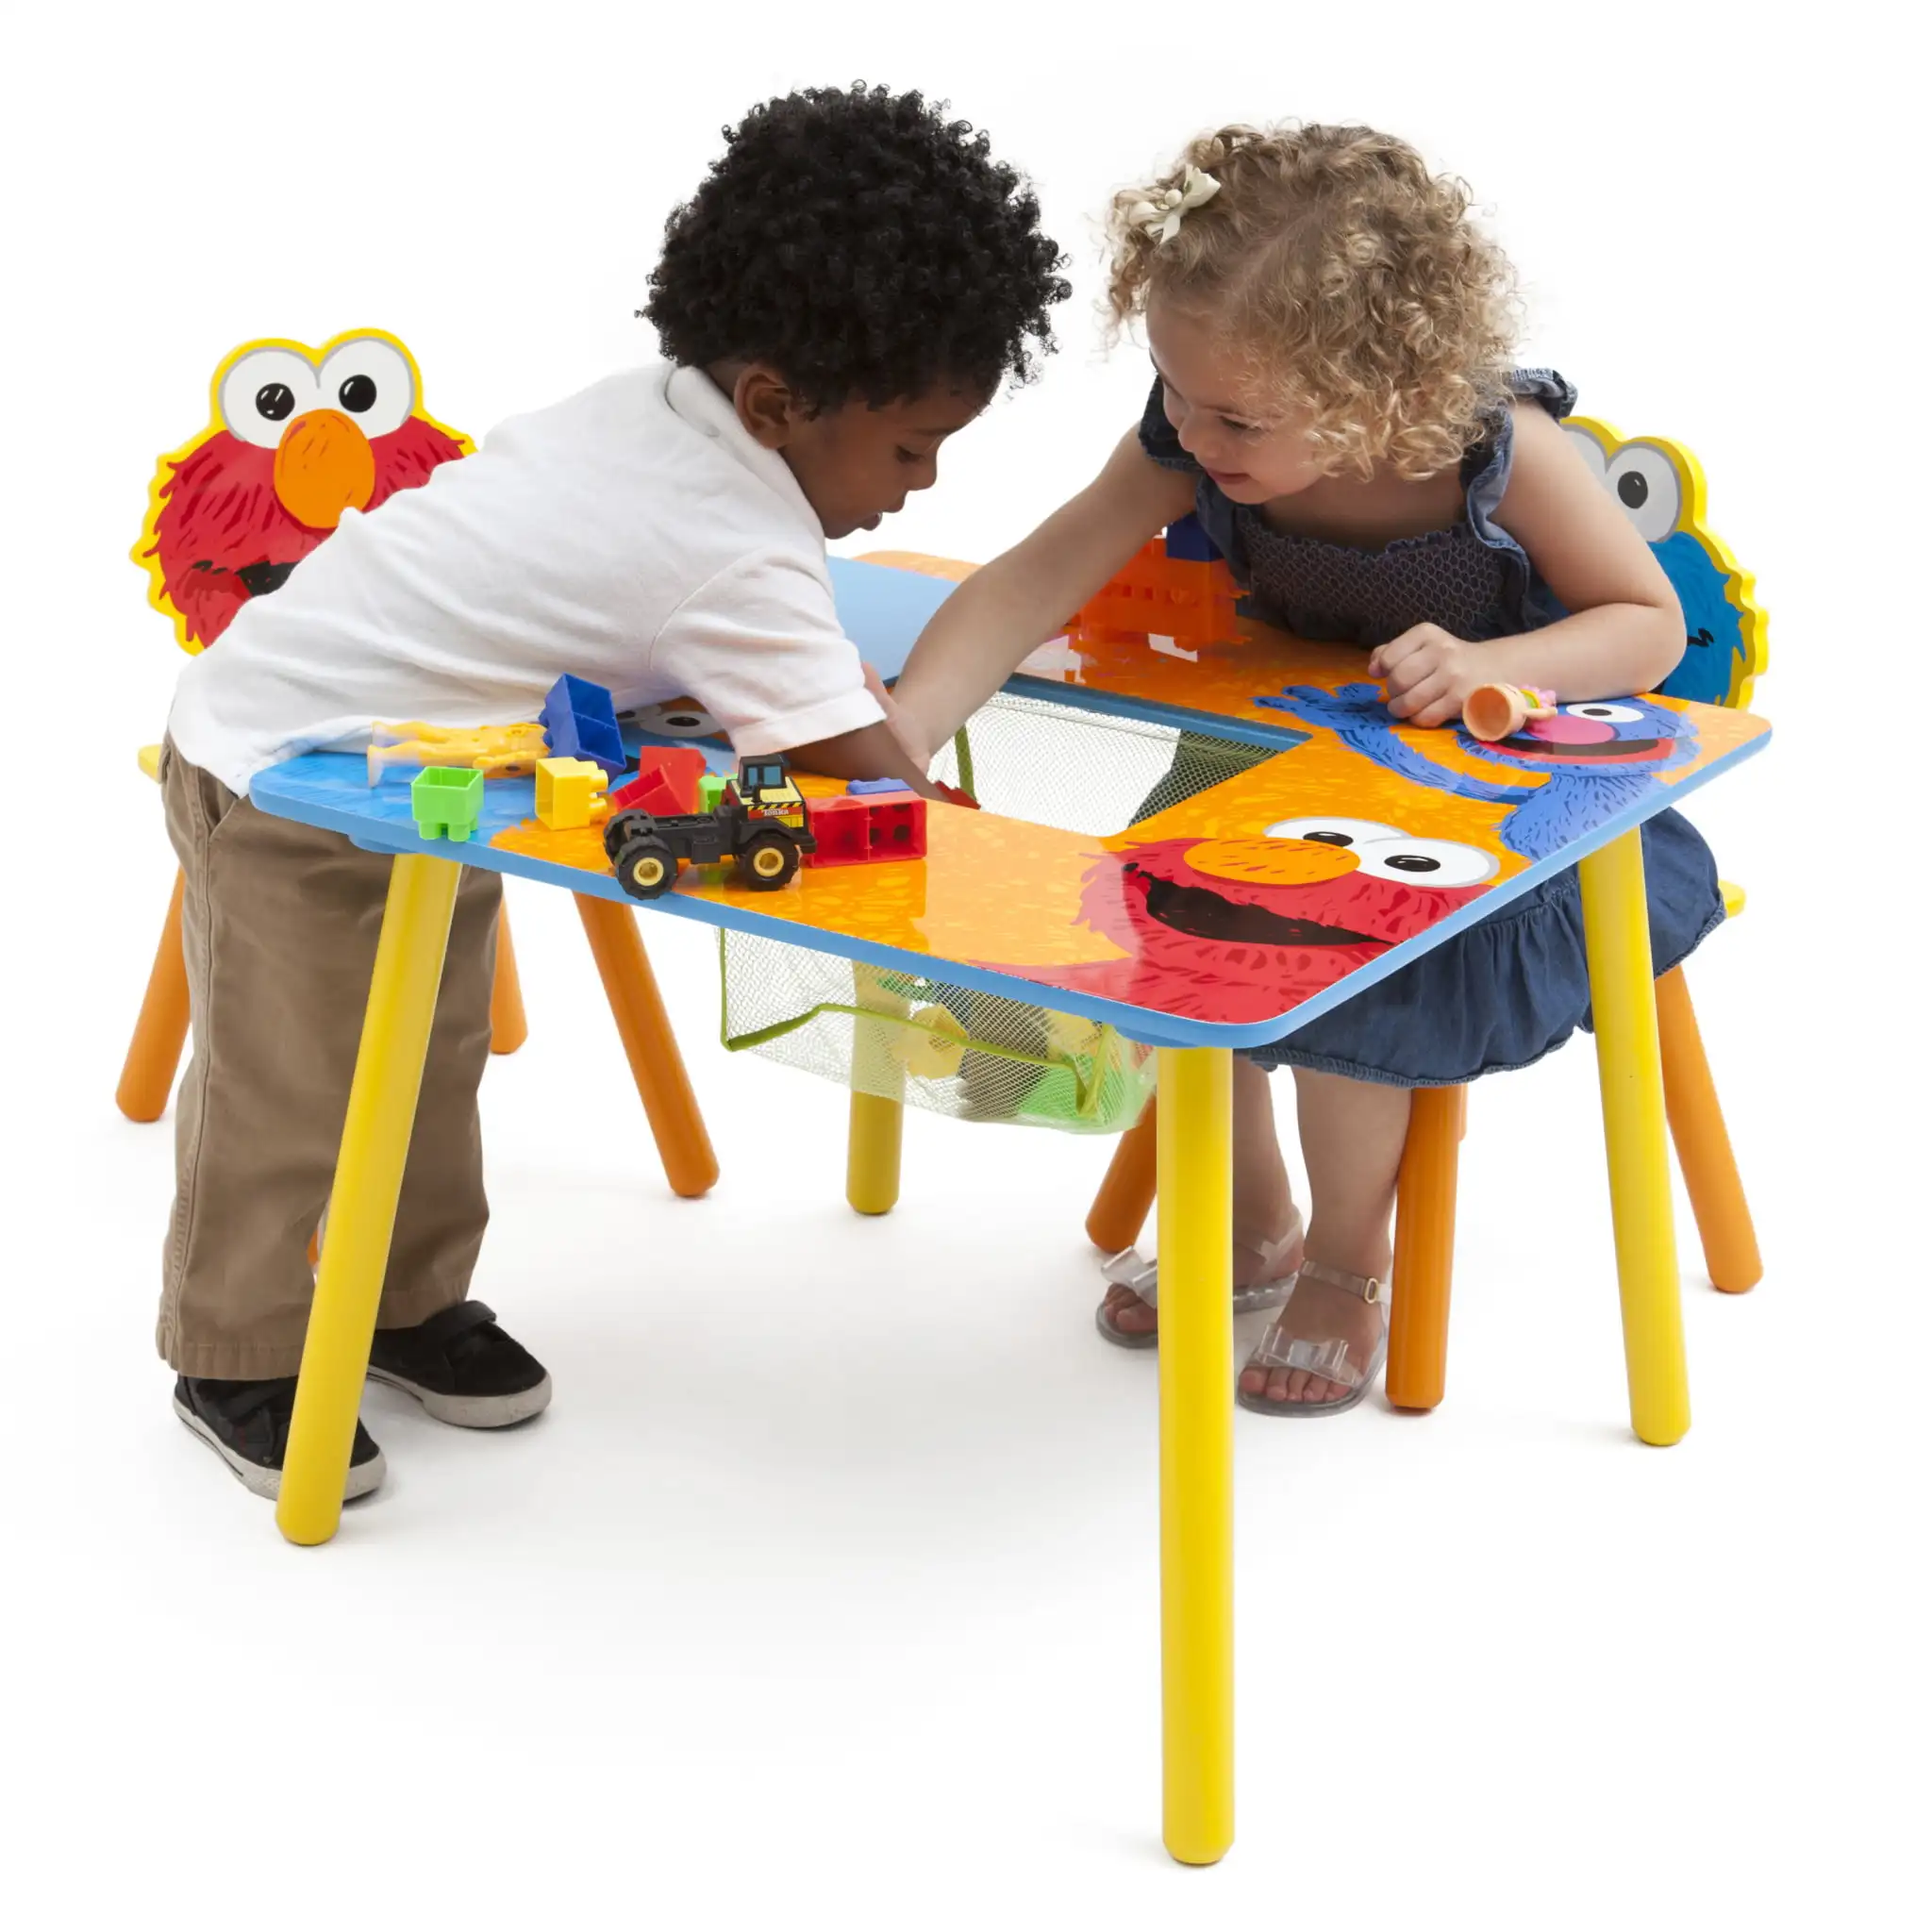 Street Wood Kids Storage Table and Chairs Set by Delta Children - $73.53